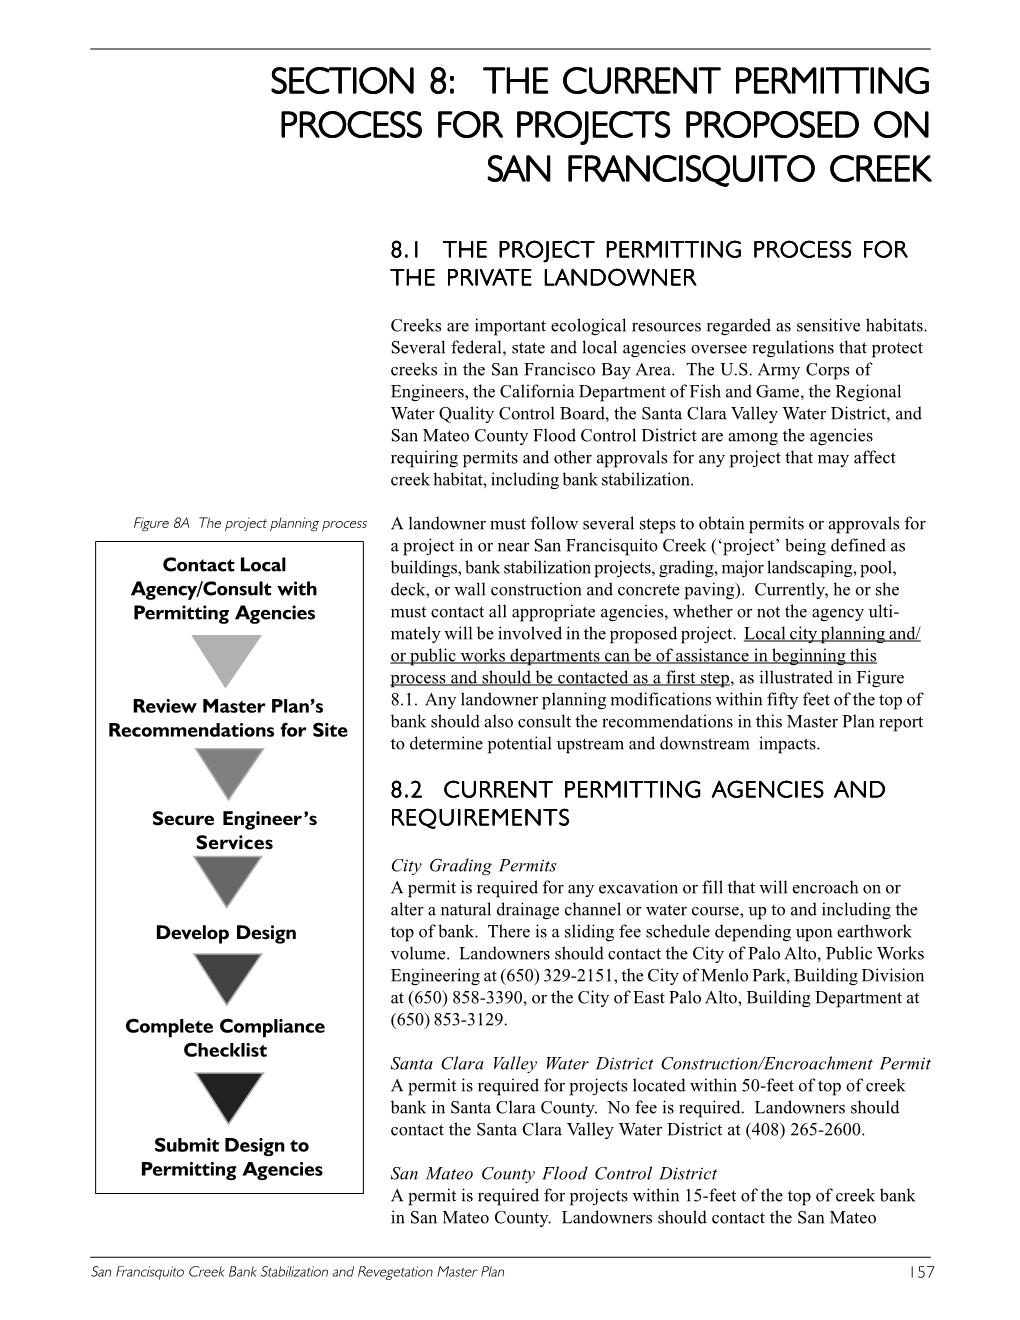 Section 8: the Current Permitting Process for Projects Proposed on San Francisquito Creek